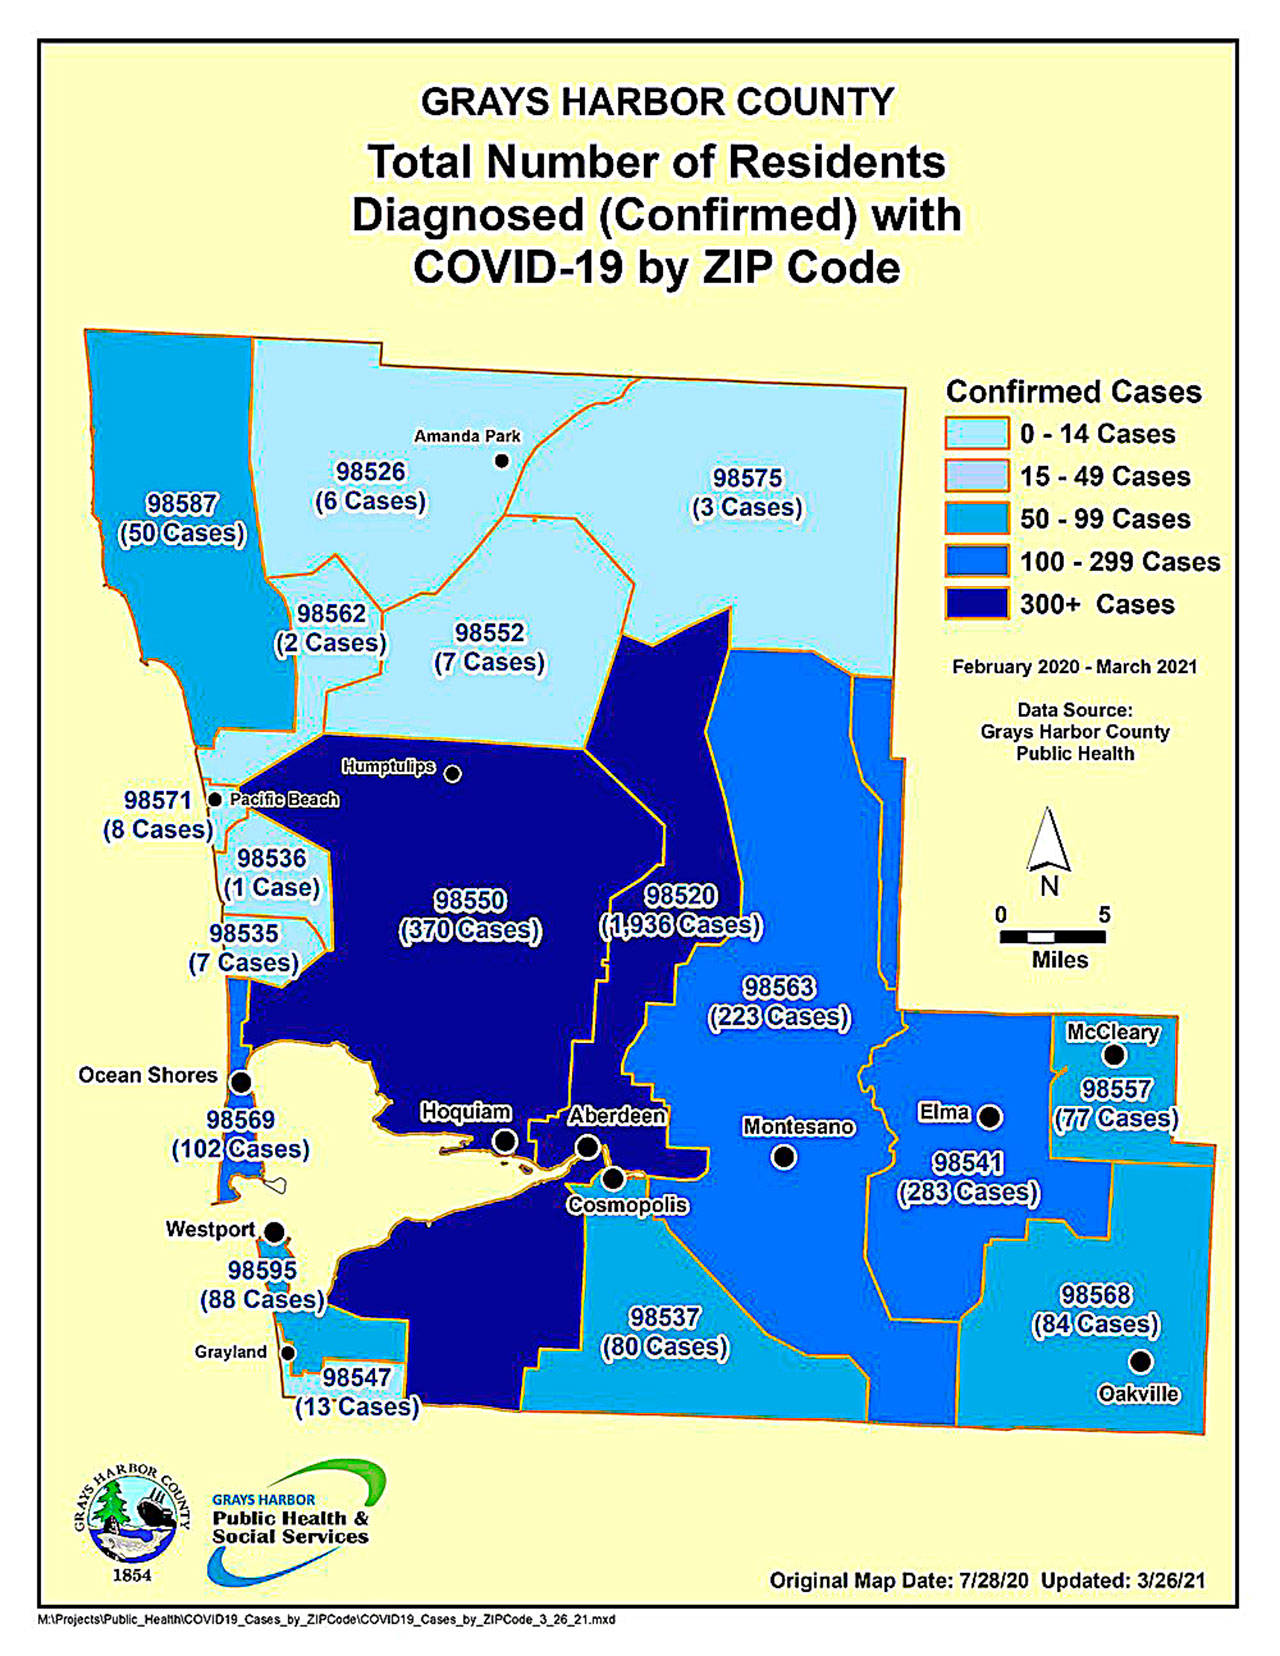 COURTESY GRAYS HARBOR PUBLIC HEALTH 
A map of COVID-19 cases over the length of the pandemic so far in Grays Harbor County by zip code, updated Friday.